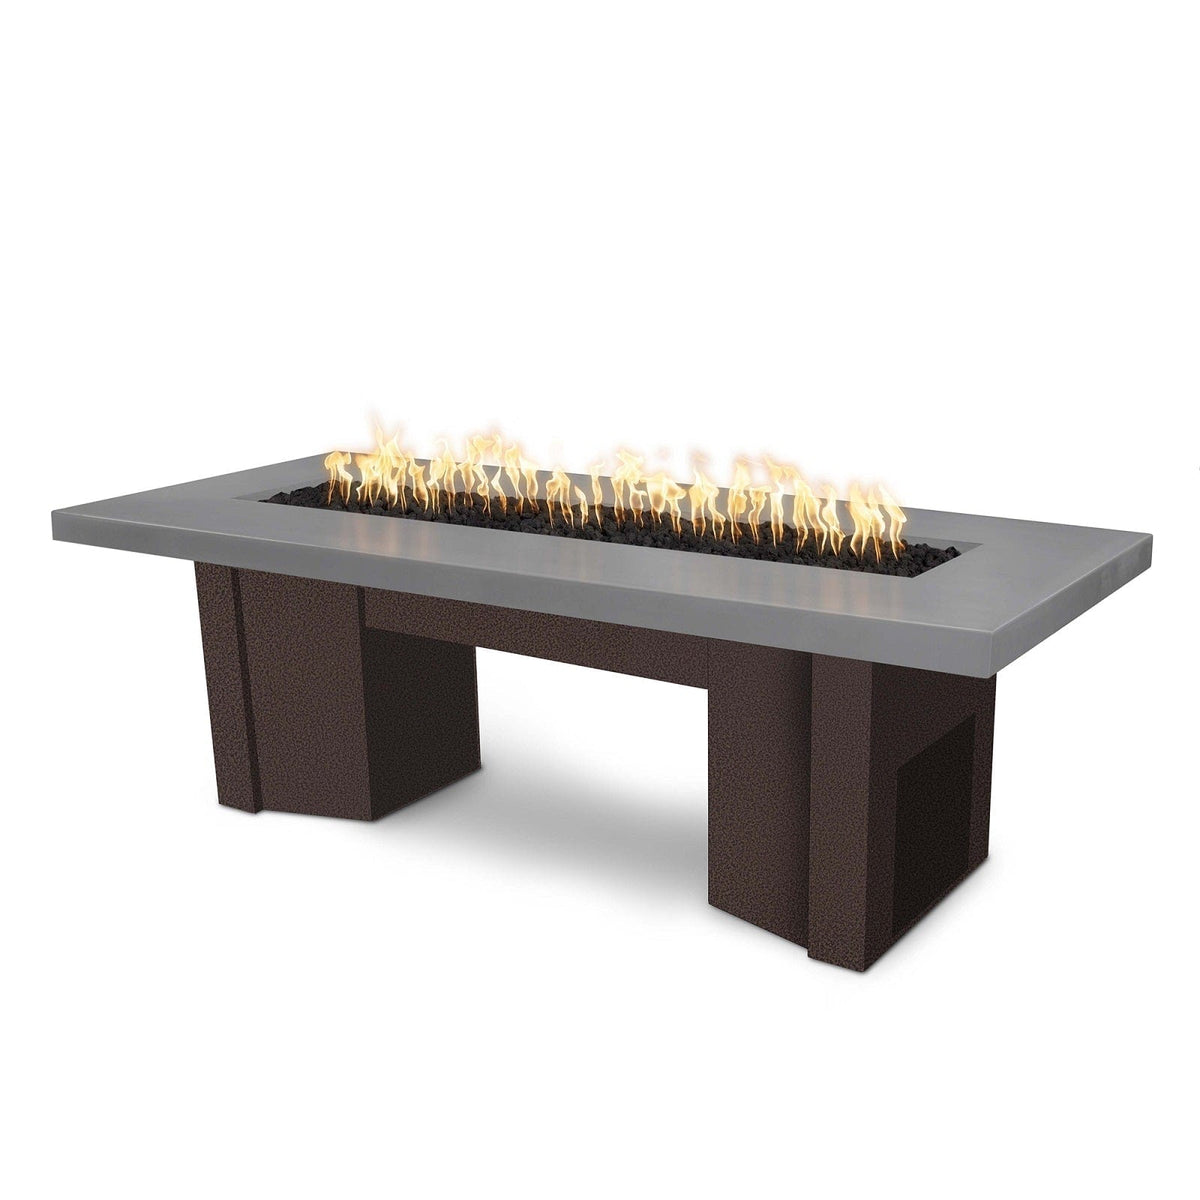 The Outdoor Plus Fire Features Natural Gray (-NGY) / Copper Vein Powder Coated Steel (-CPV) The Outdoor Plus 78&quot; Alameda Fire Table Smooth Concrete in Natural Gas - 110V Plug &amp; Play Electronic Ignition / OPT-ALMGFRC78EKIT-NG